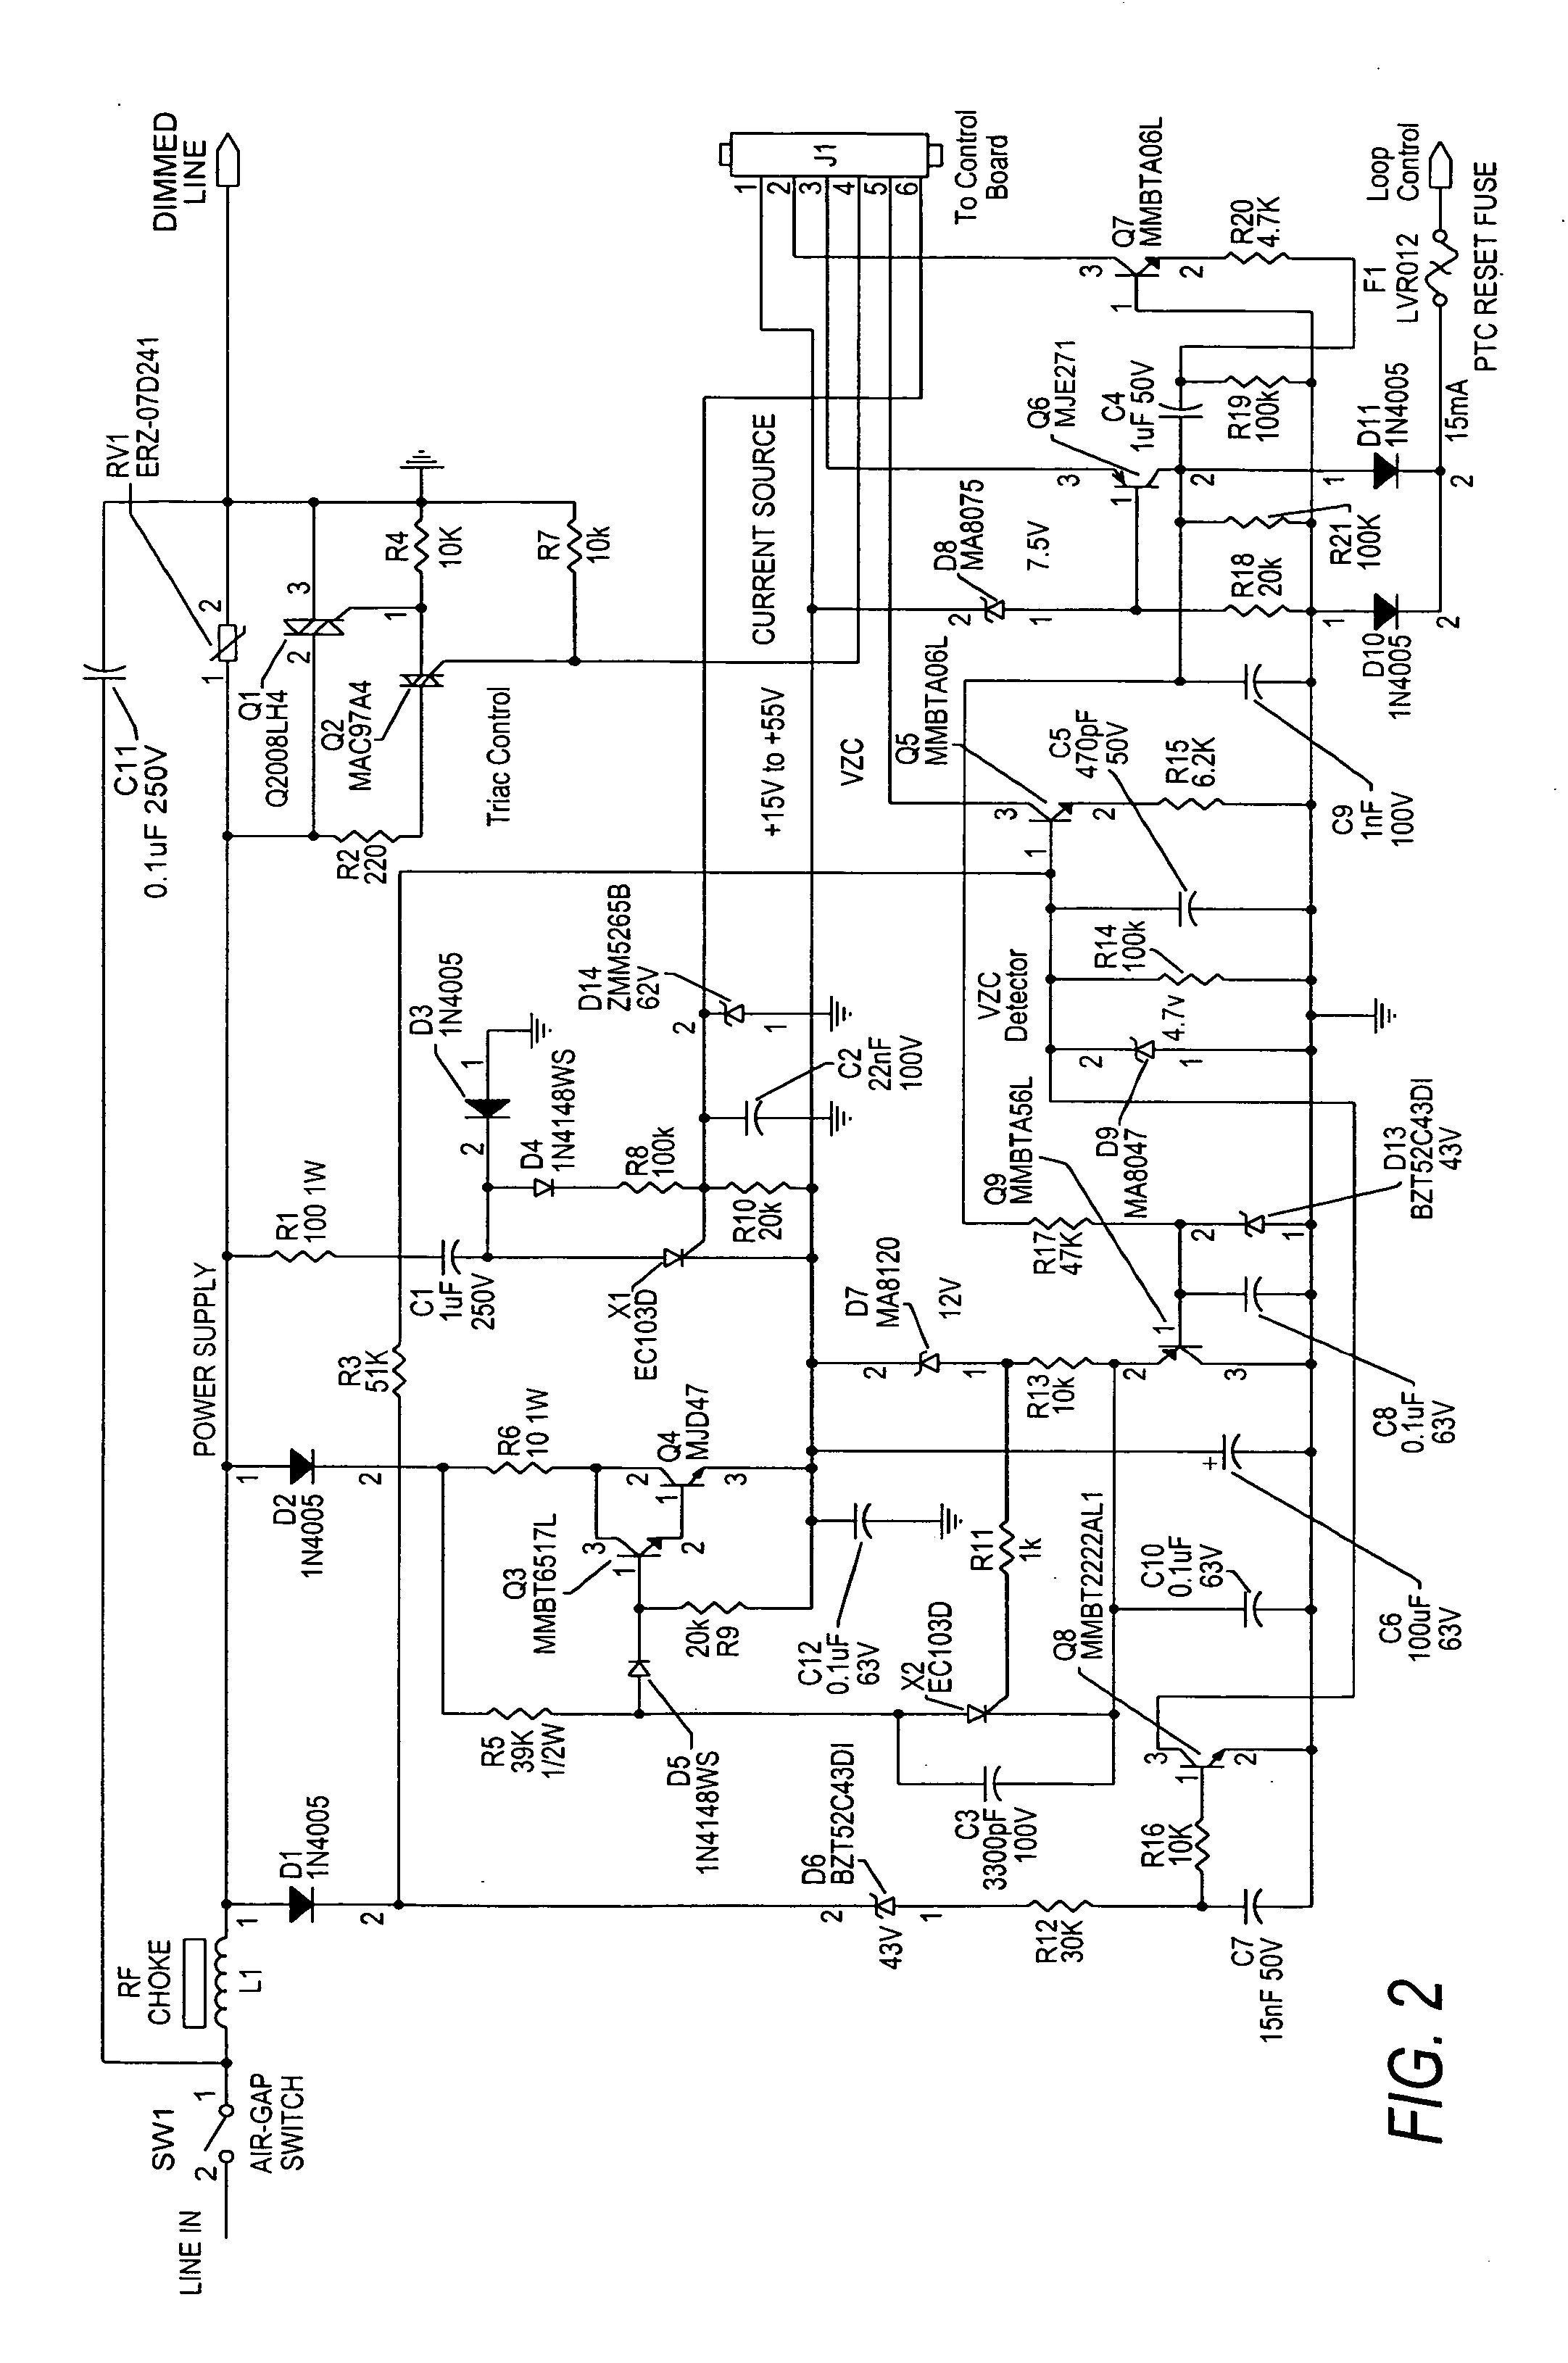 Dimmer control system with memory